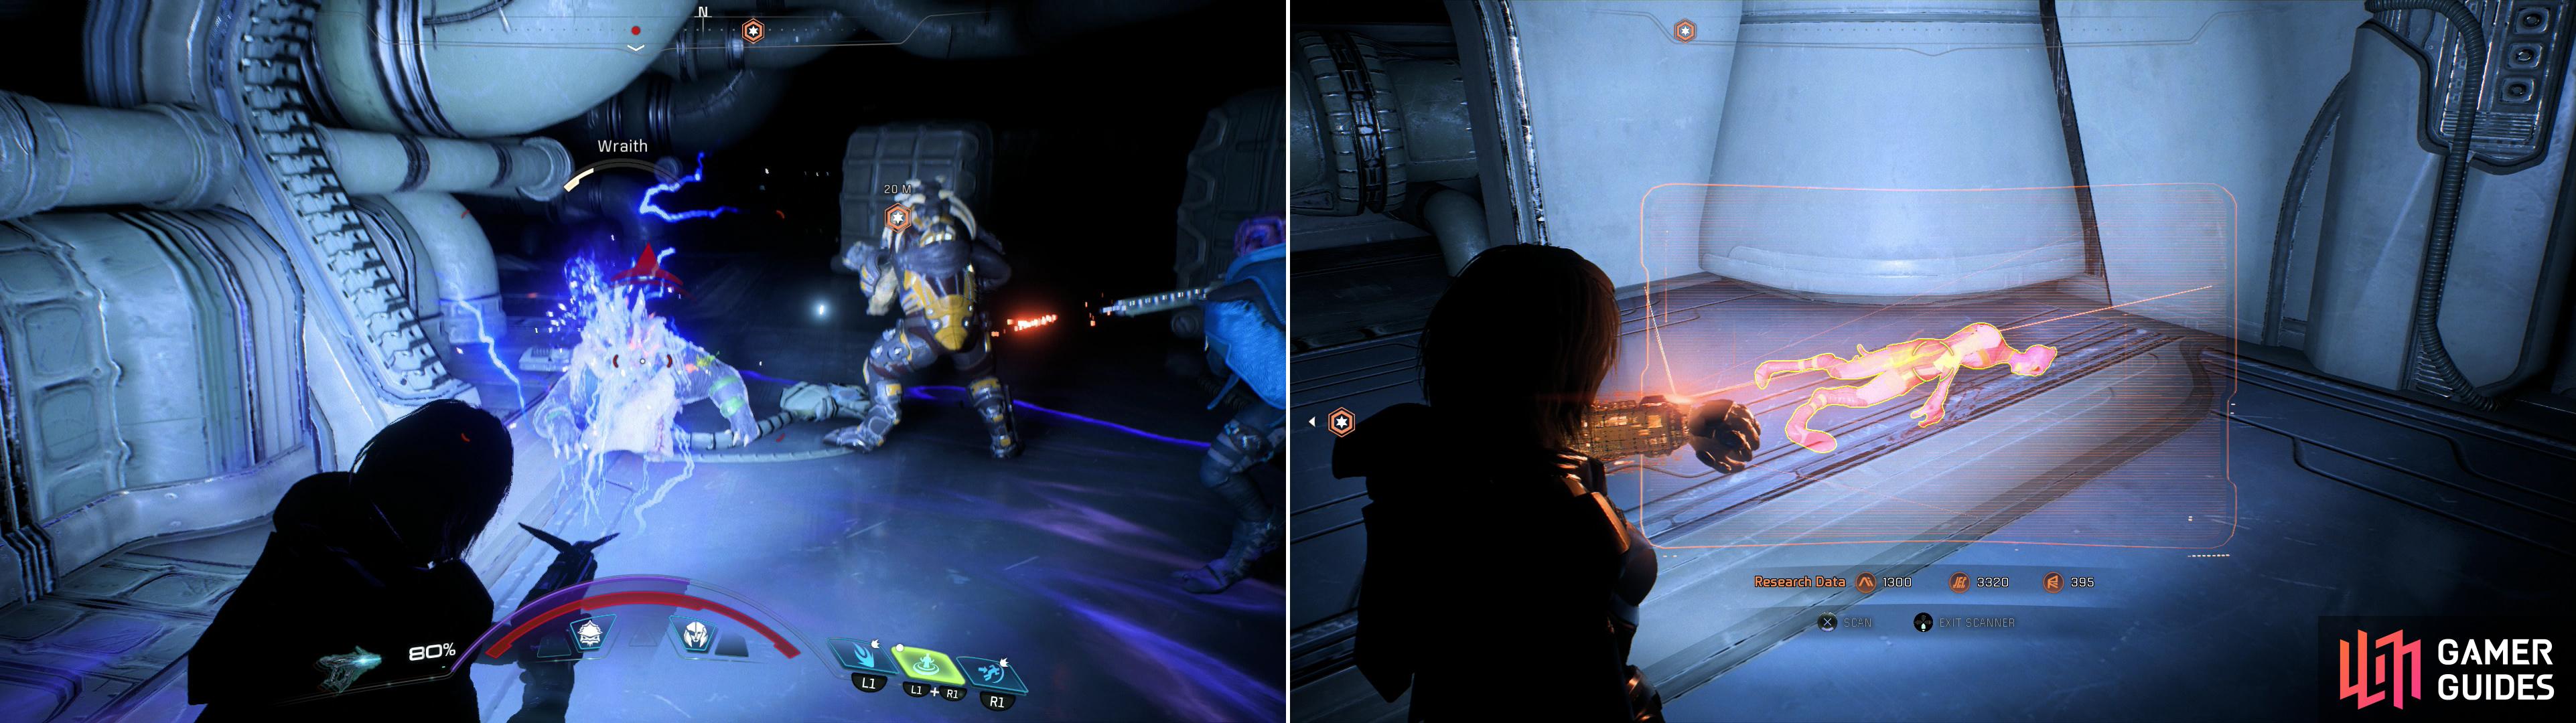 Kill the Wraith in the maintenance tunnels (left) then examine the Salarian it preyed upon (right).